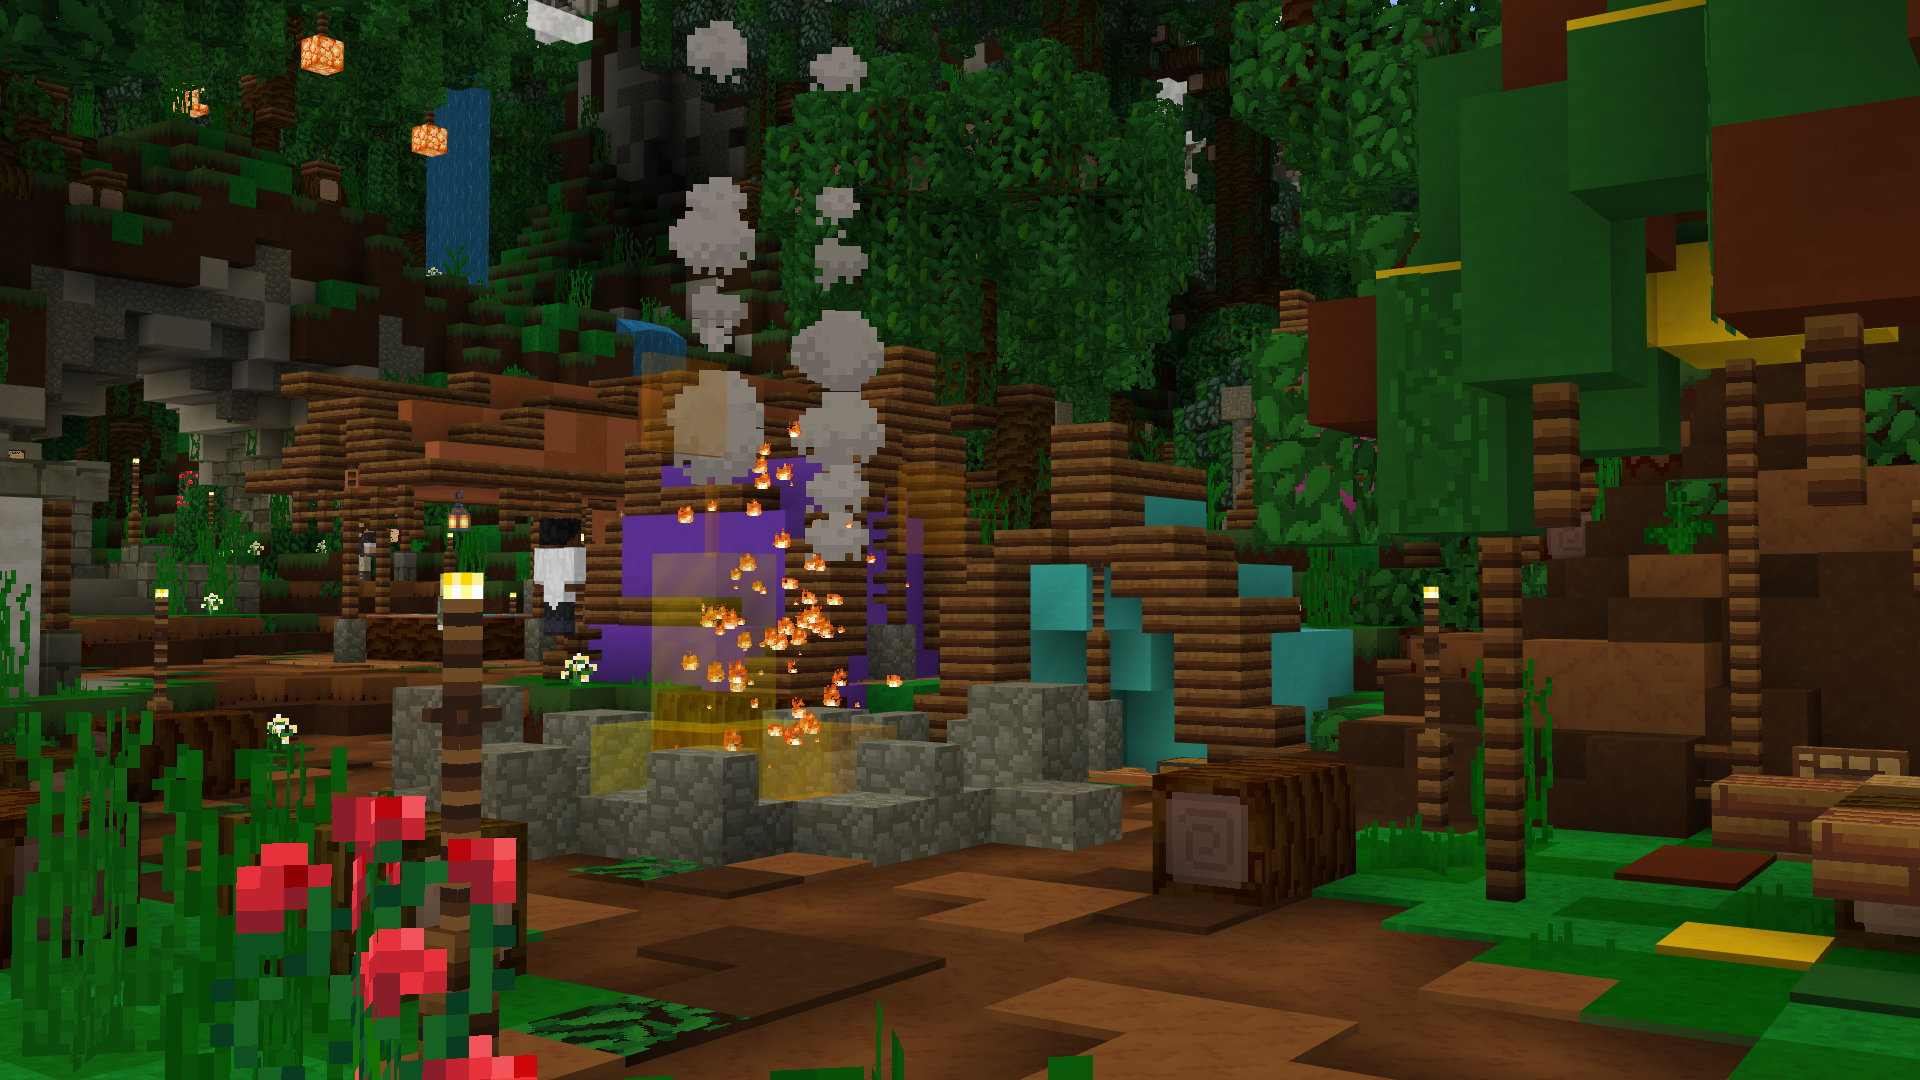 A screenshot within Minecraft of the main camp area in Jungle Royale. A campfire is burning, and is surrounded by several tents. Trees take up most of the space in the background.